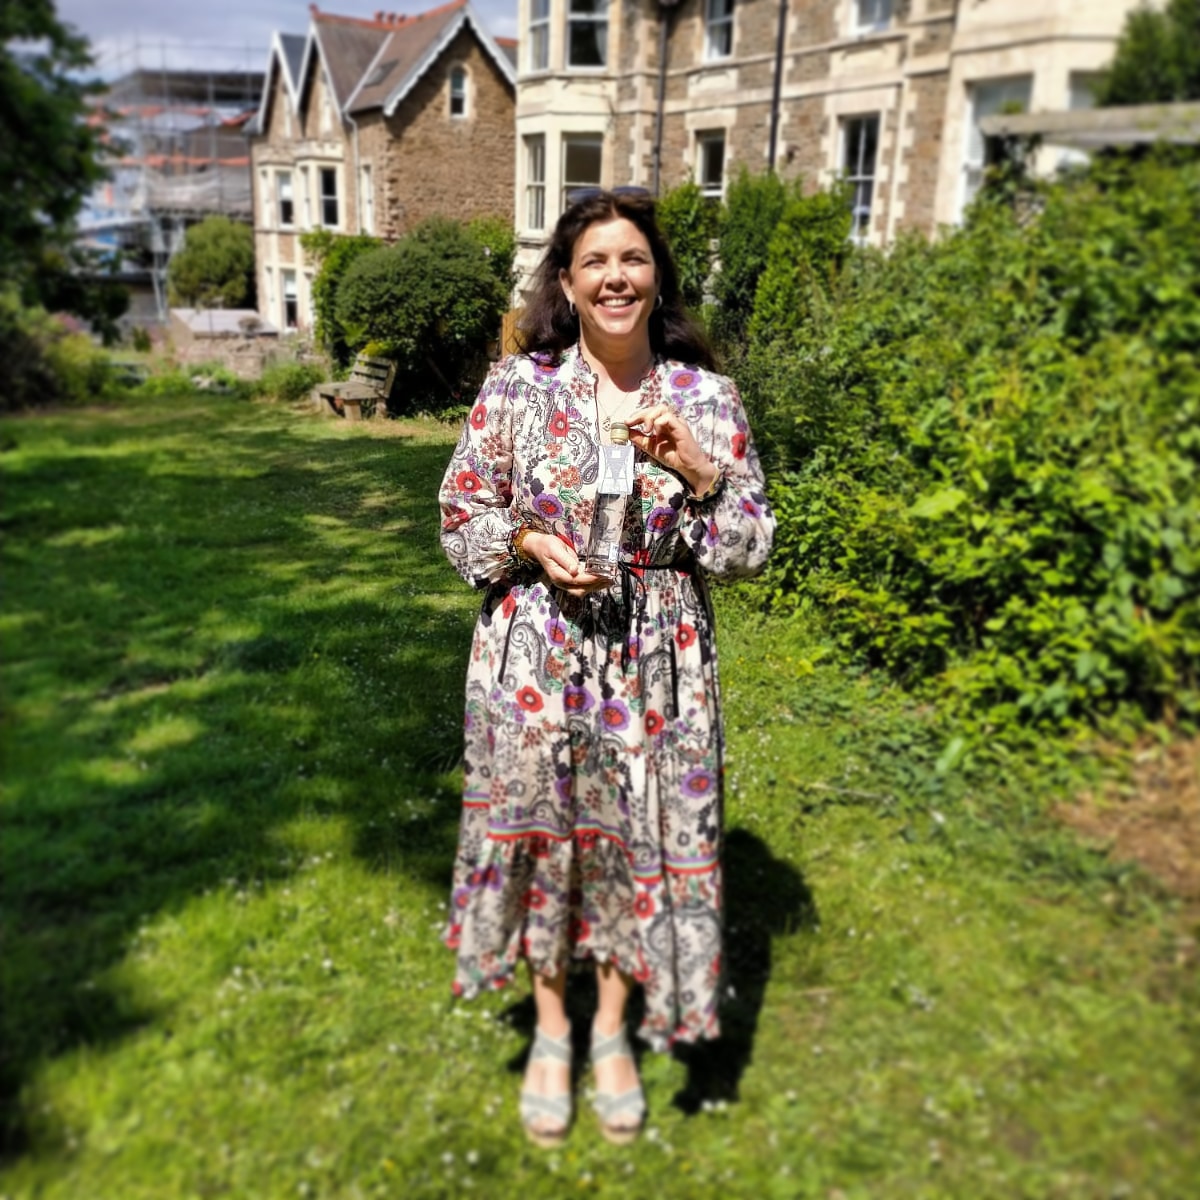 Look at what Kirstie Allsopp is holding!

Our first celebrity with #PierGin.

Thank you @kirstiemallsopp for your time and smiles today. 

#supportlocal #localgin #Clevedon #northsomerset #ginthusiasts #ginfluencers